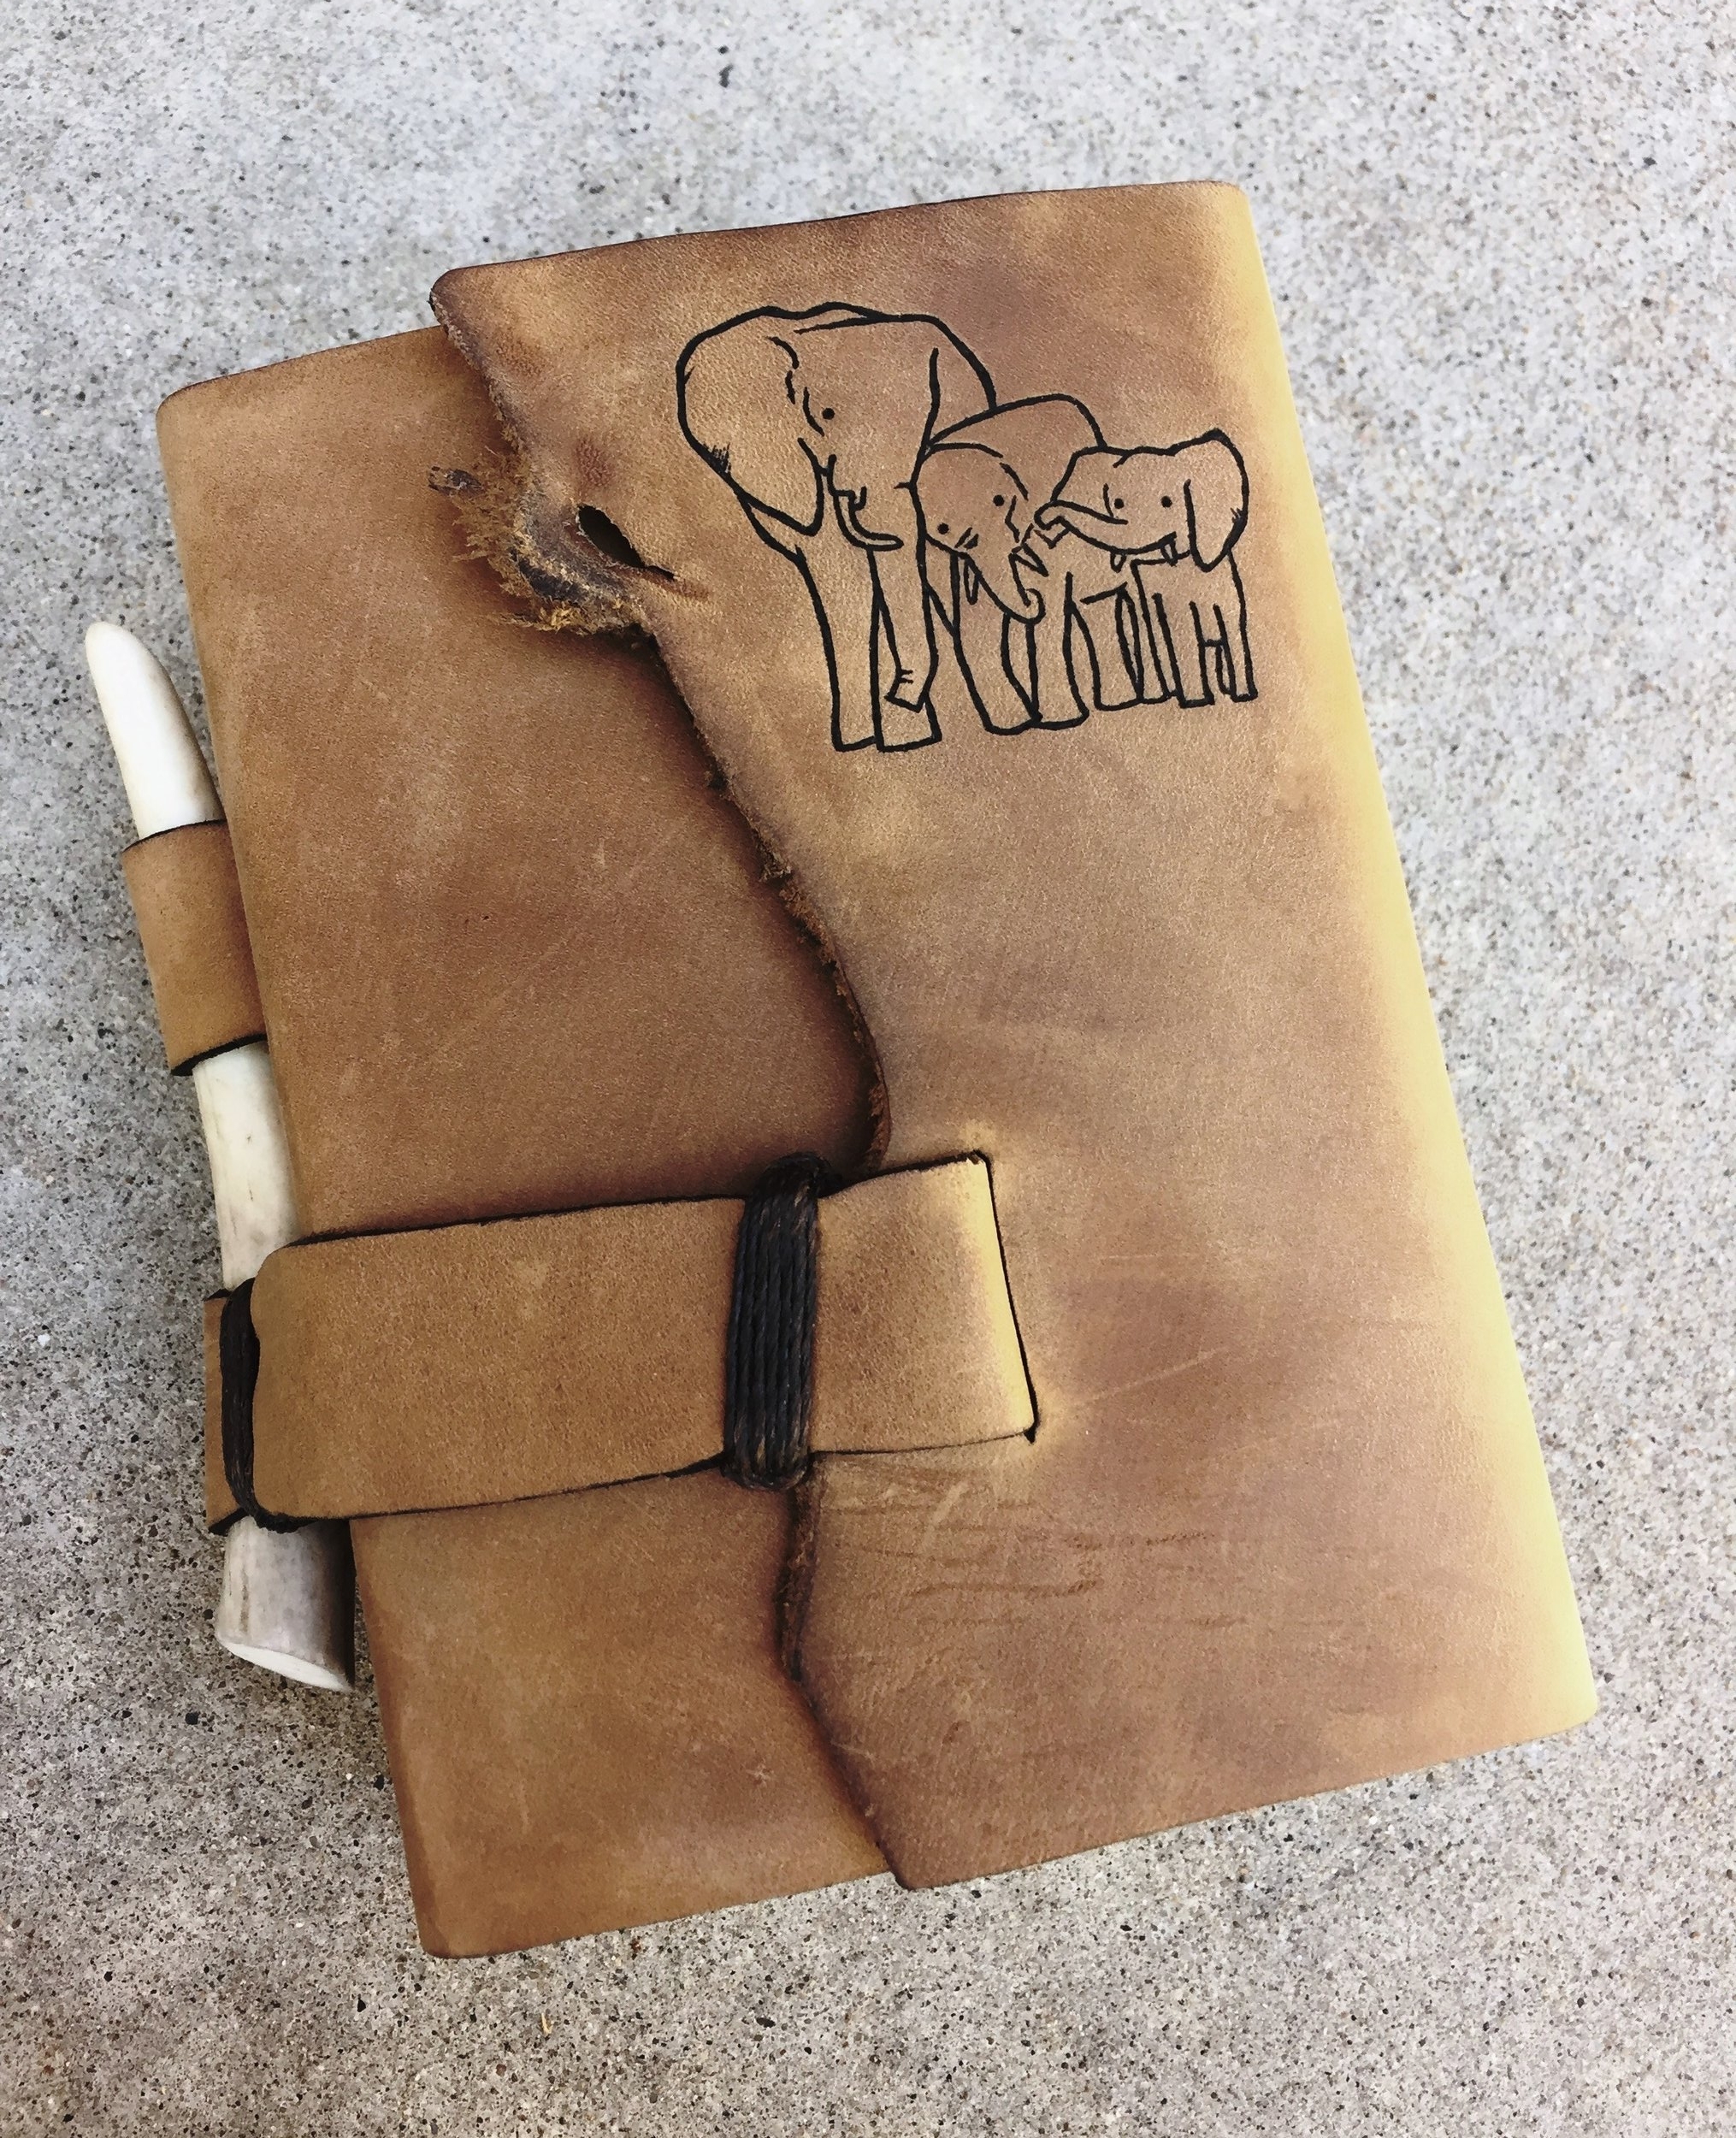 Circle M Brand - LDS compact Quad Scriptures with Antler and Elephants engraving.JPG